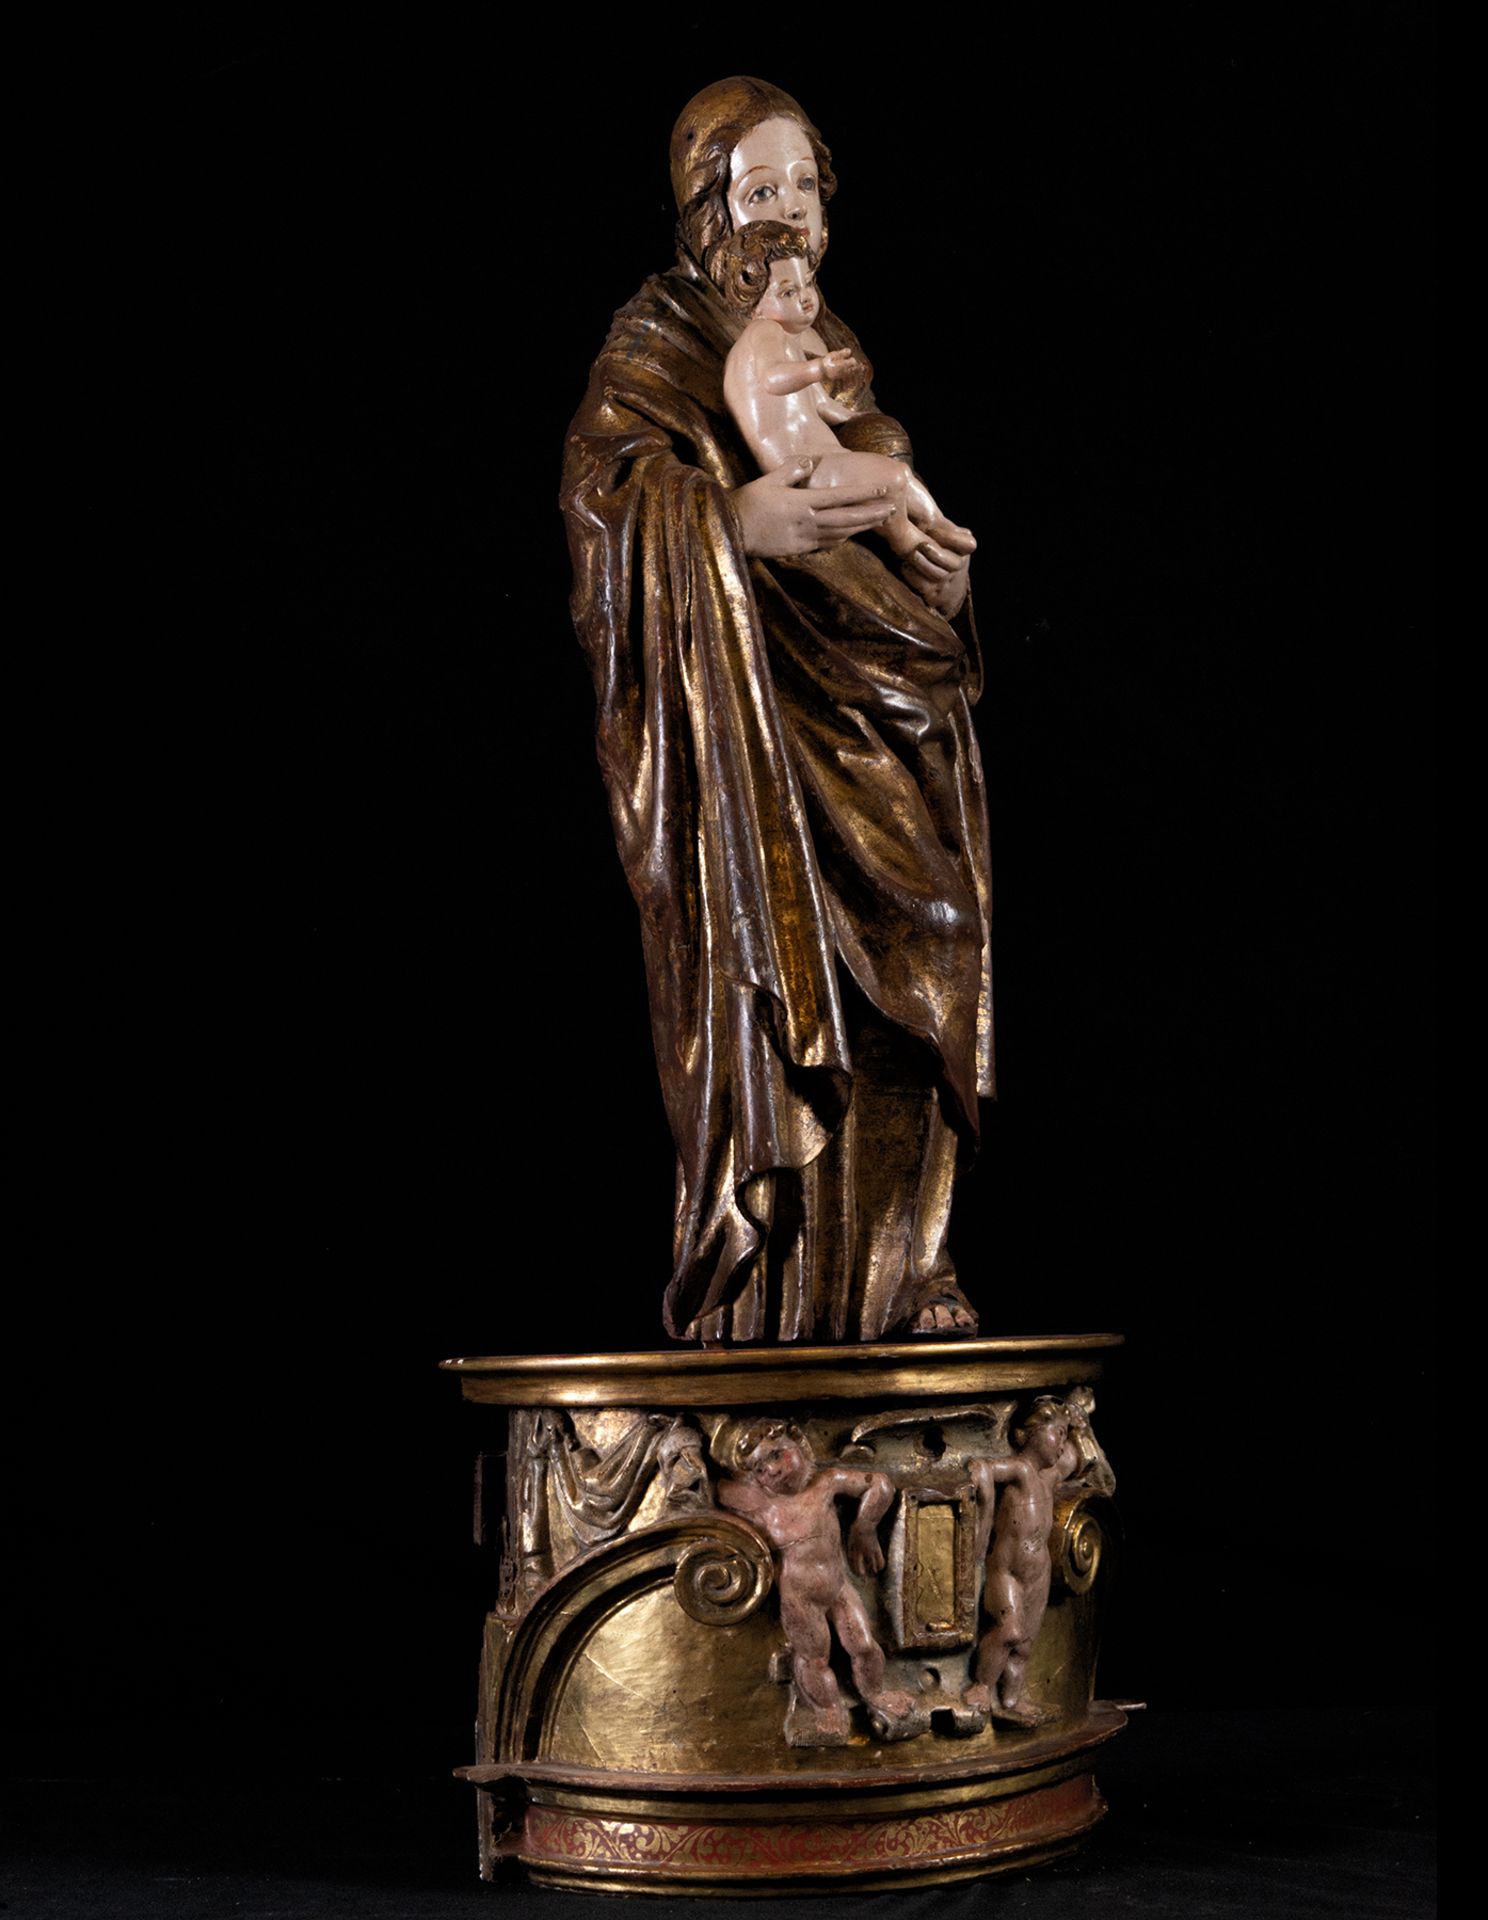 Spectacular Large Virgin with Child in her arms in wood carving, Romanist school of the 16th century - Image 7 of 9